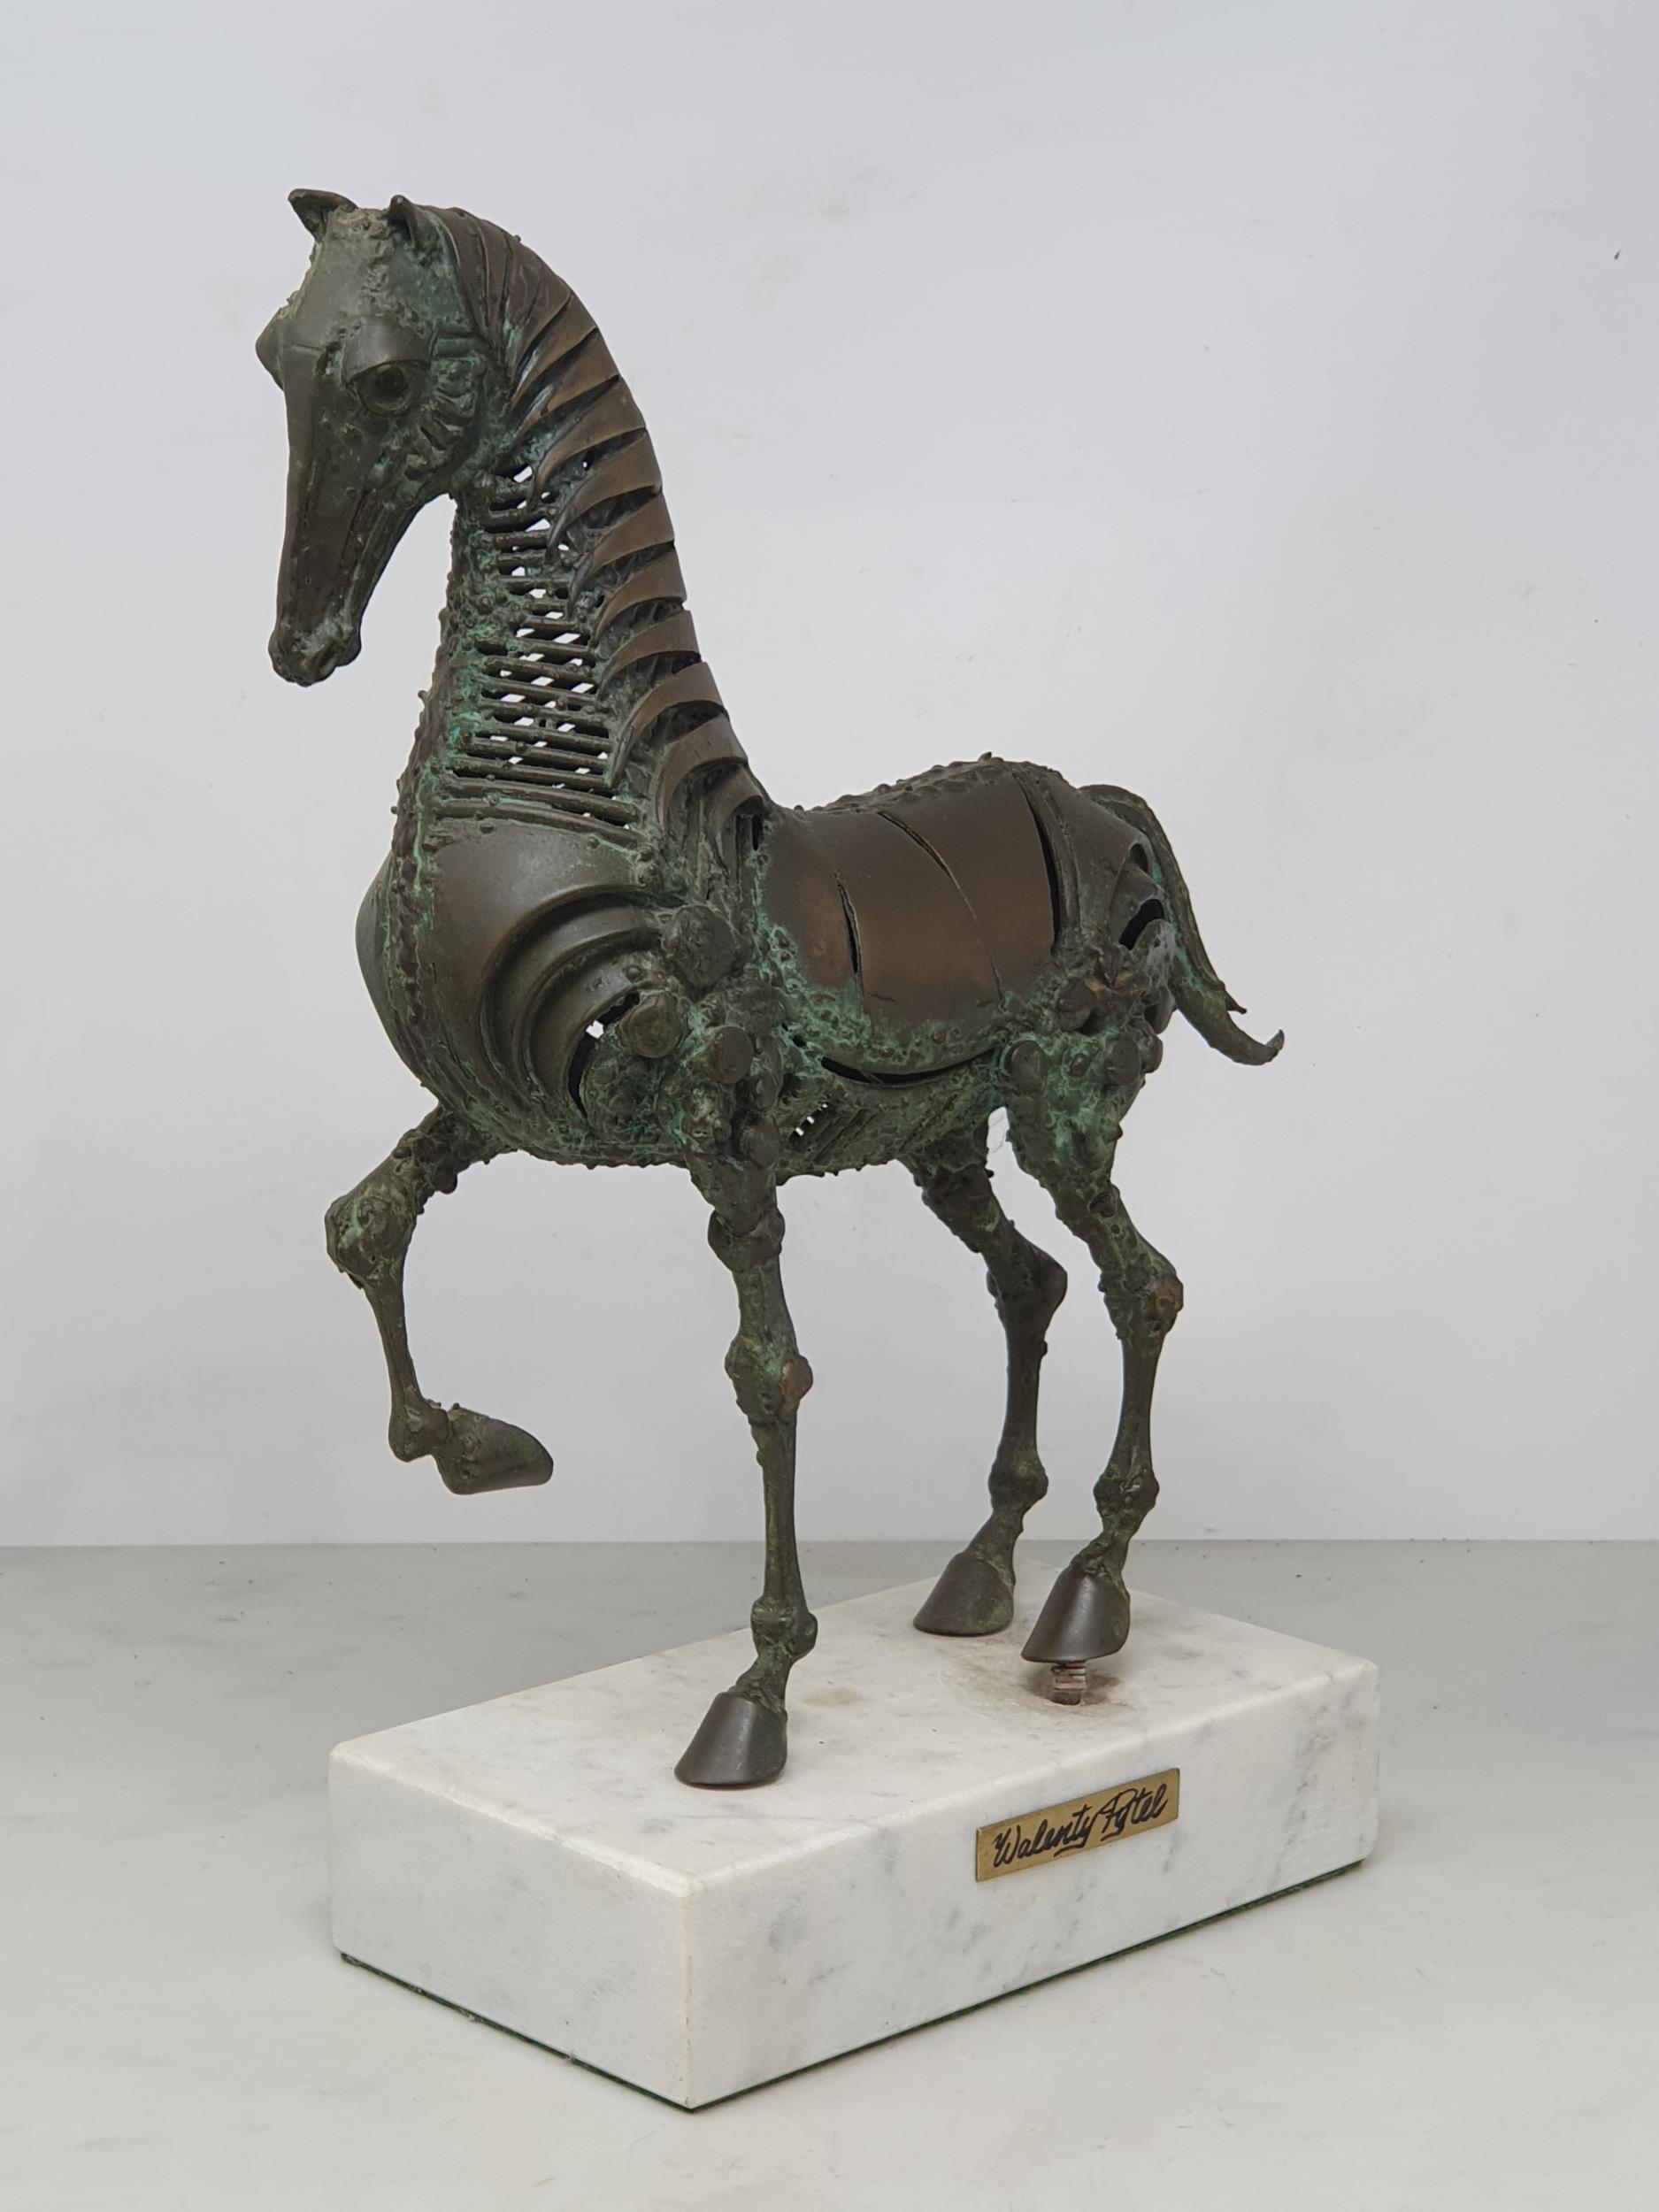 WALENTY PYTEL. A patinated bronze Sculpture of a prancing horse, mounted on a white rectangular